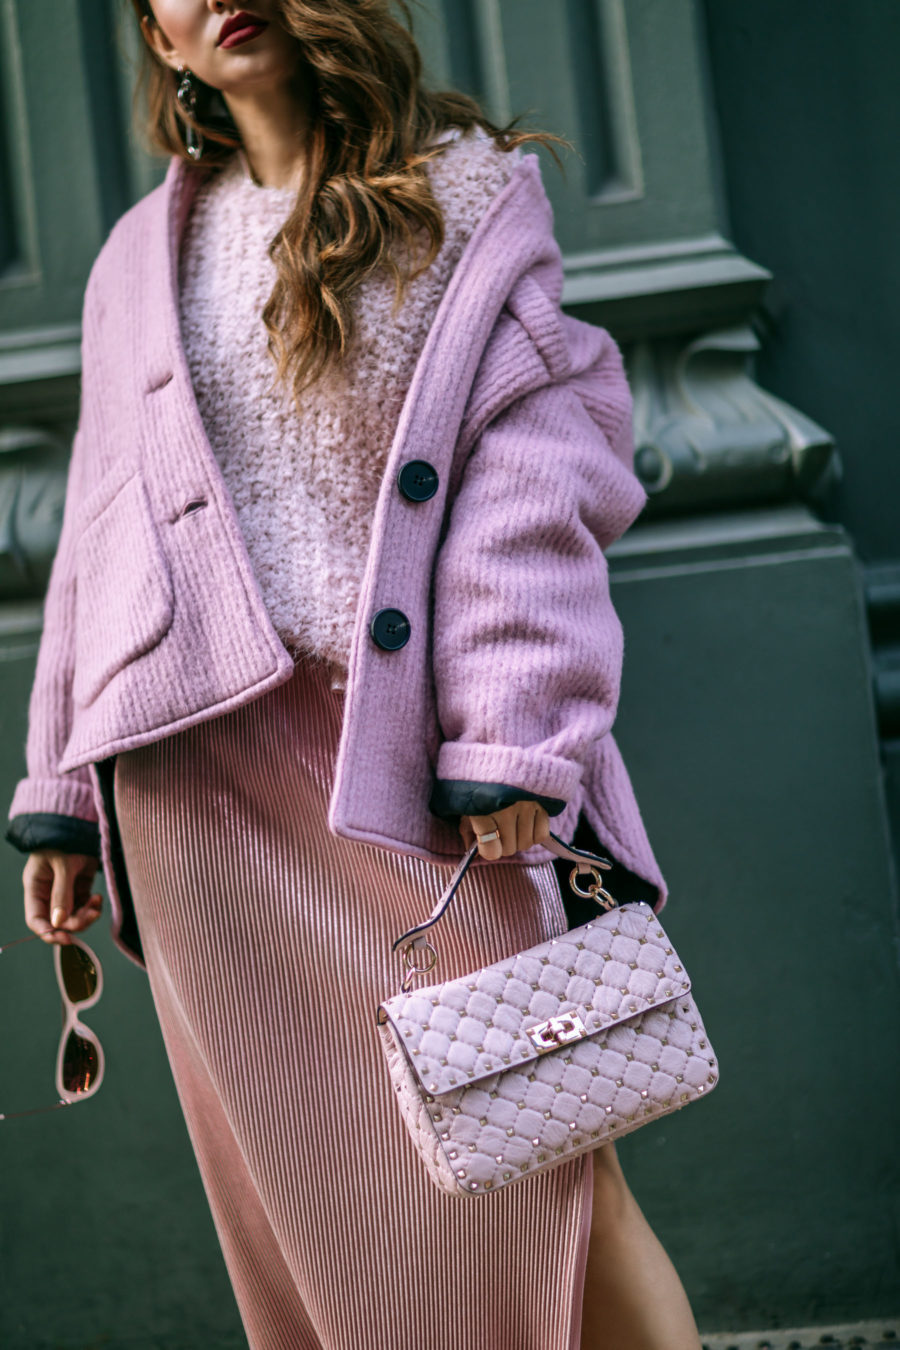 How to Wear the Corduroy Trend - Pink Monochrome Outfit, pink corduroy jacket, corduroy lined skirt // Notjessfashion.com